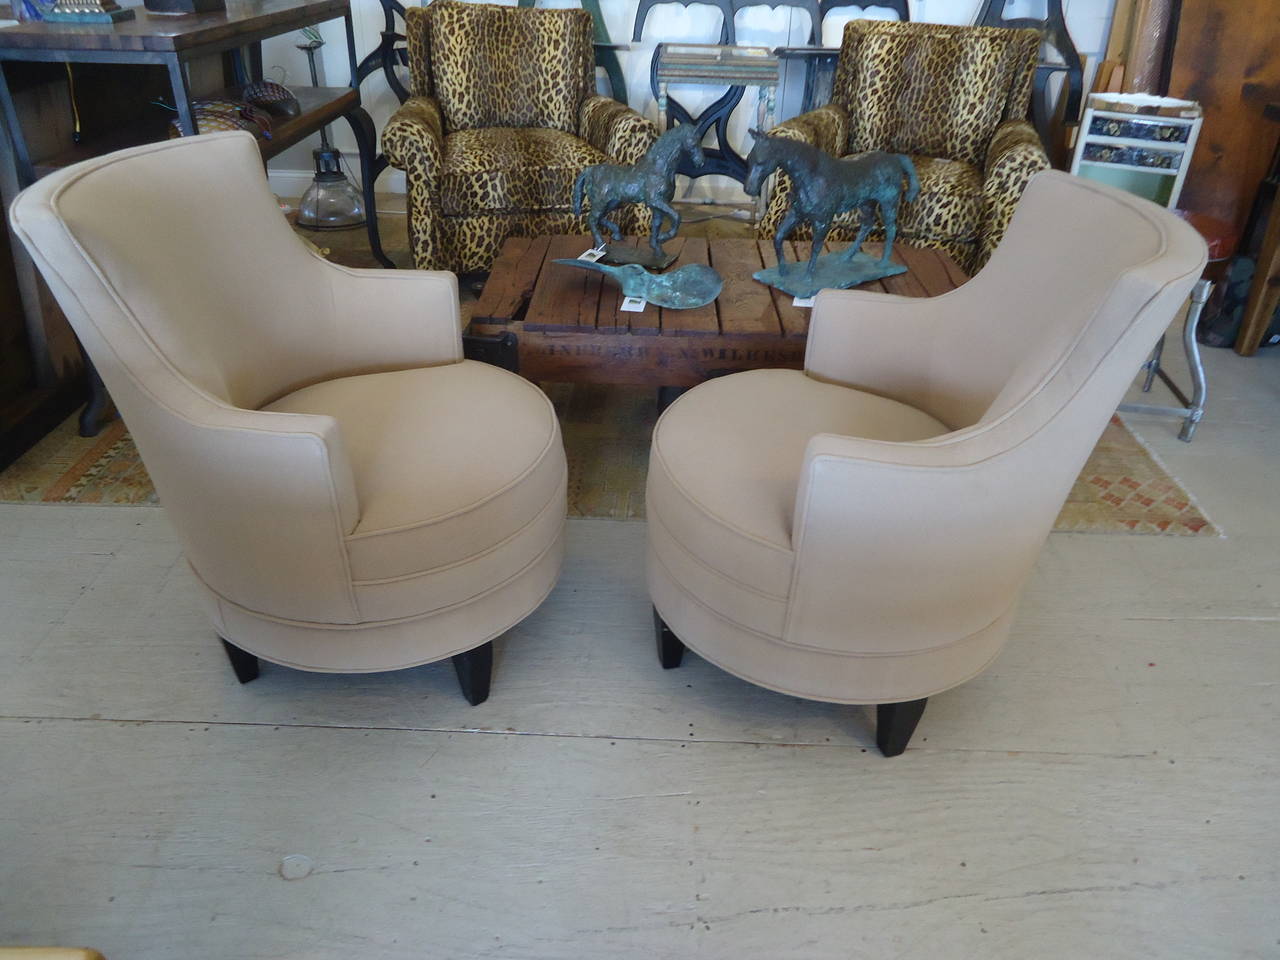 Sophisticated and tailored tub chairs having ebonized legs and new camel hair upholstery reminiscent of a gentleman's overcoat, plus they swivel smooth as silk.